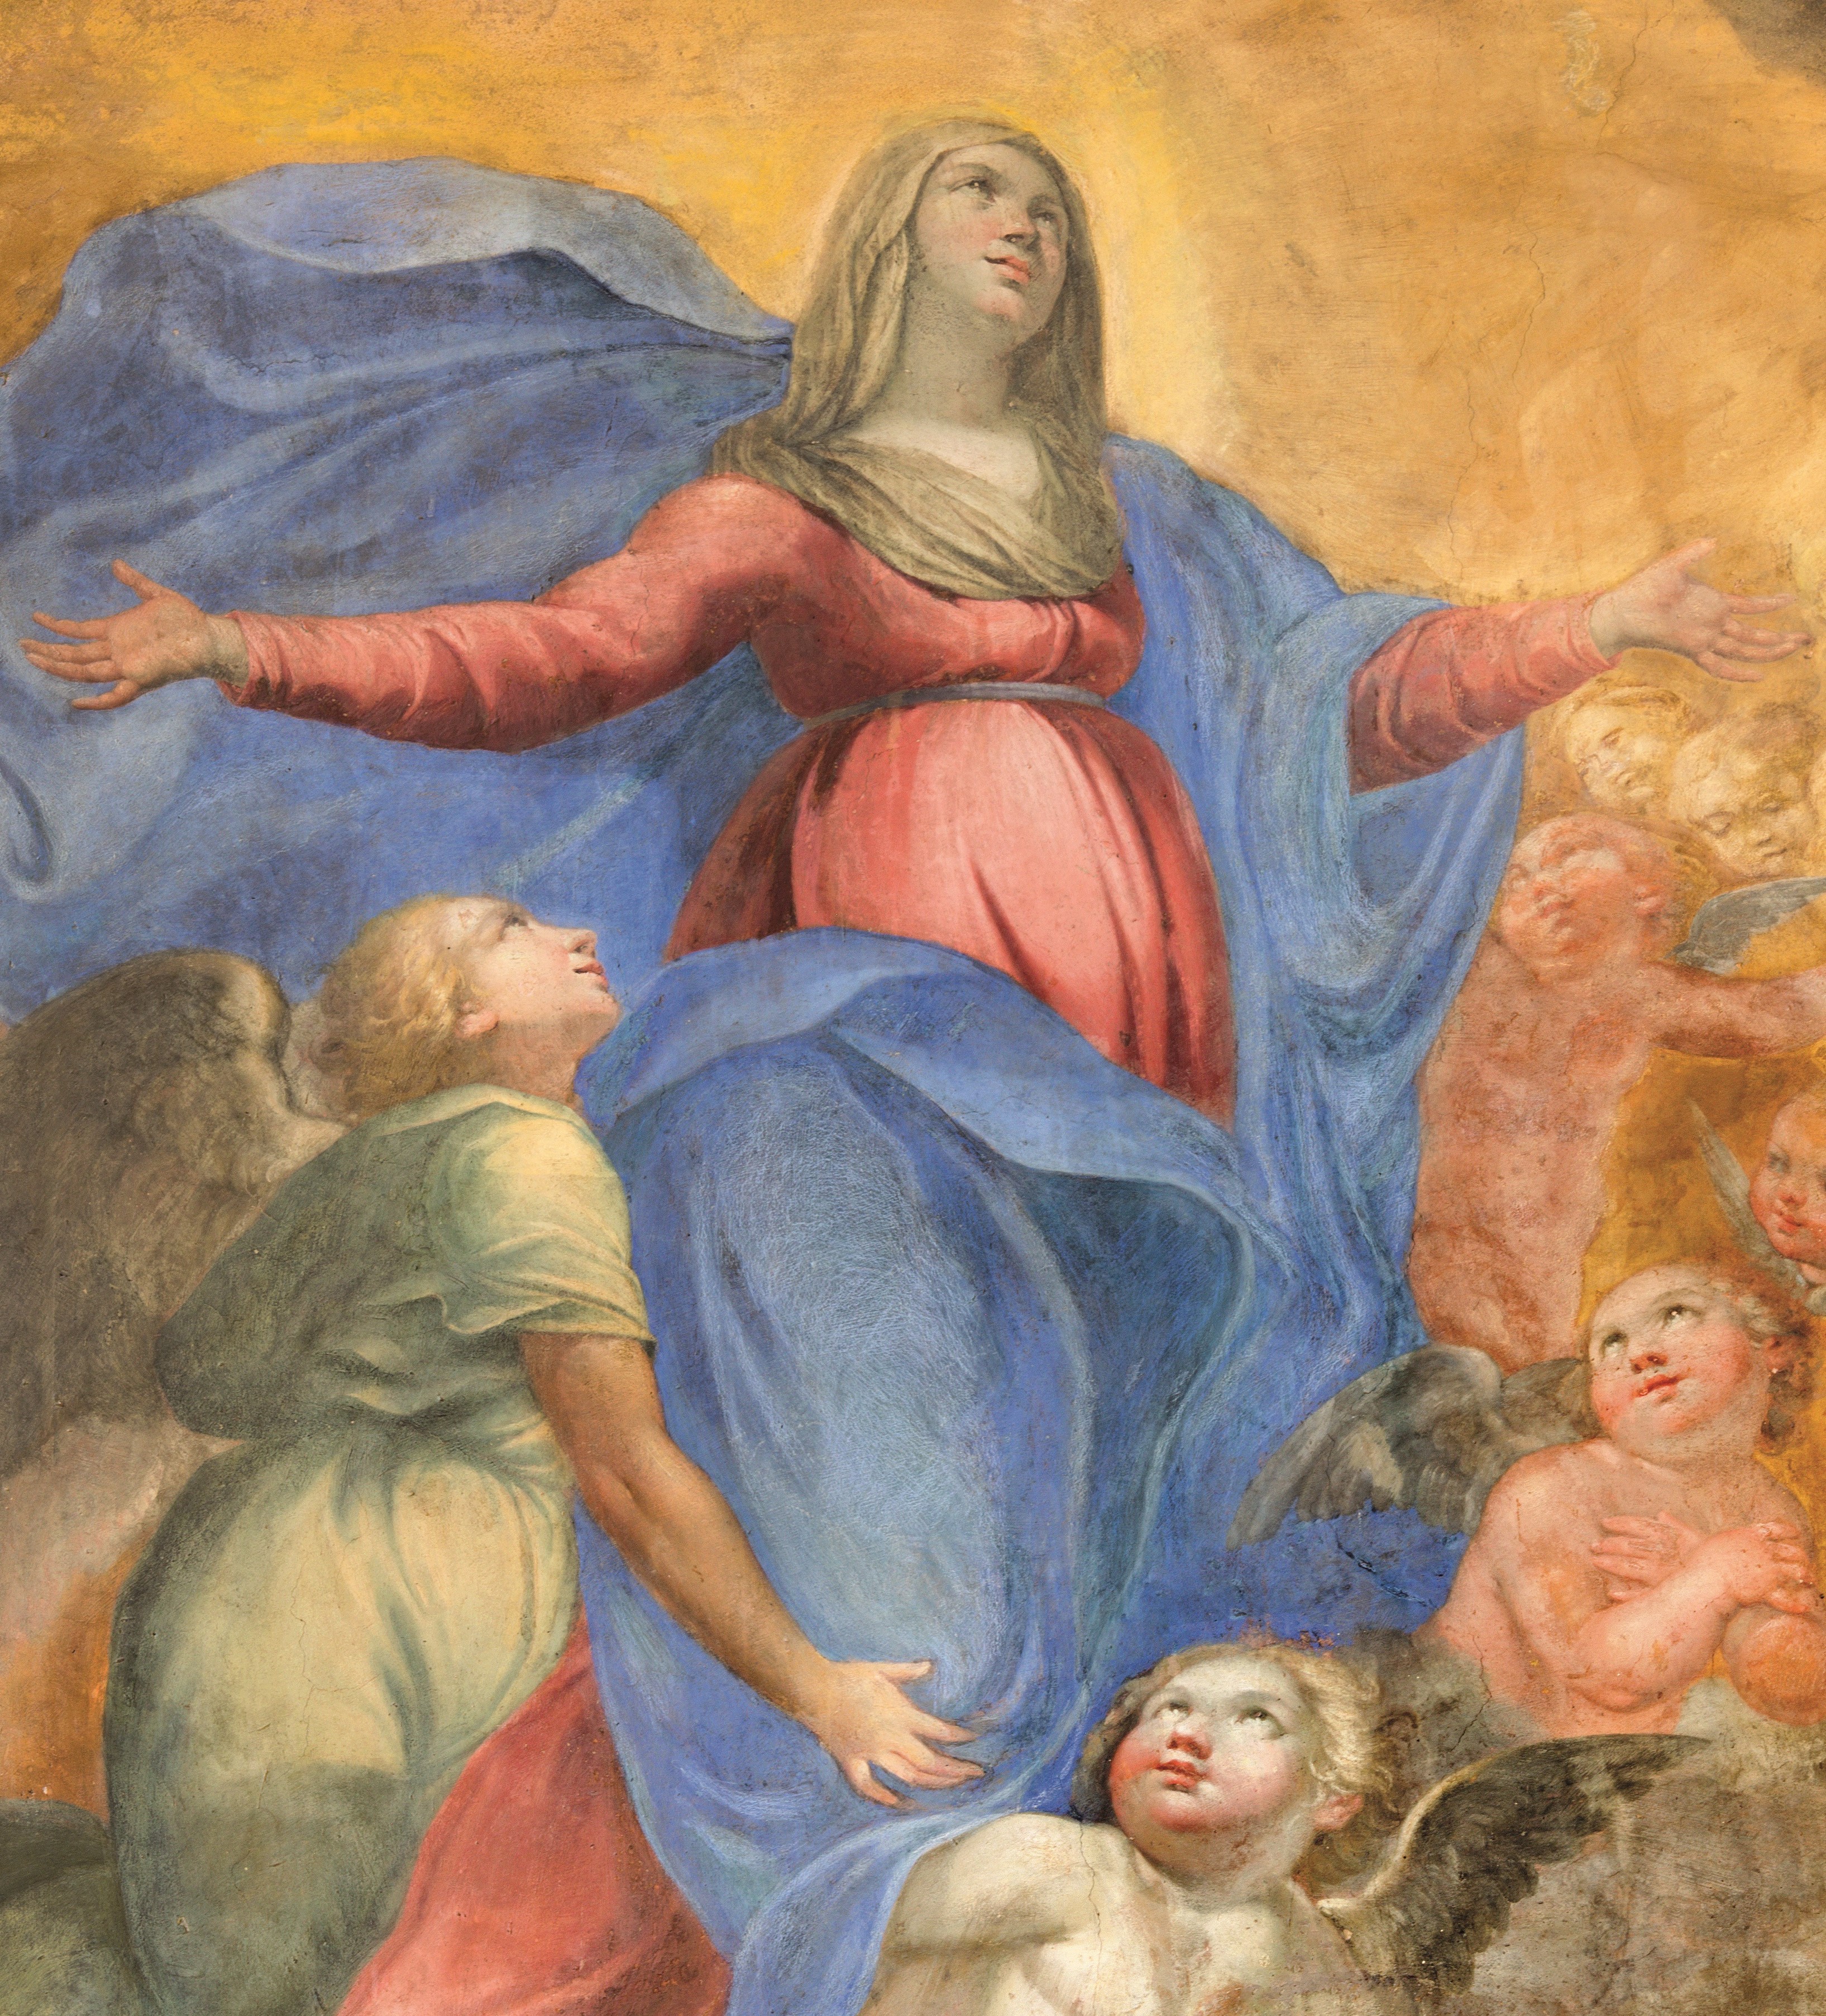 ROME, ITALY - MARCH 27, 2015: The fresco of Immaculate Conceptio